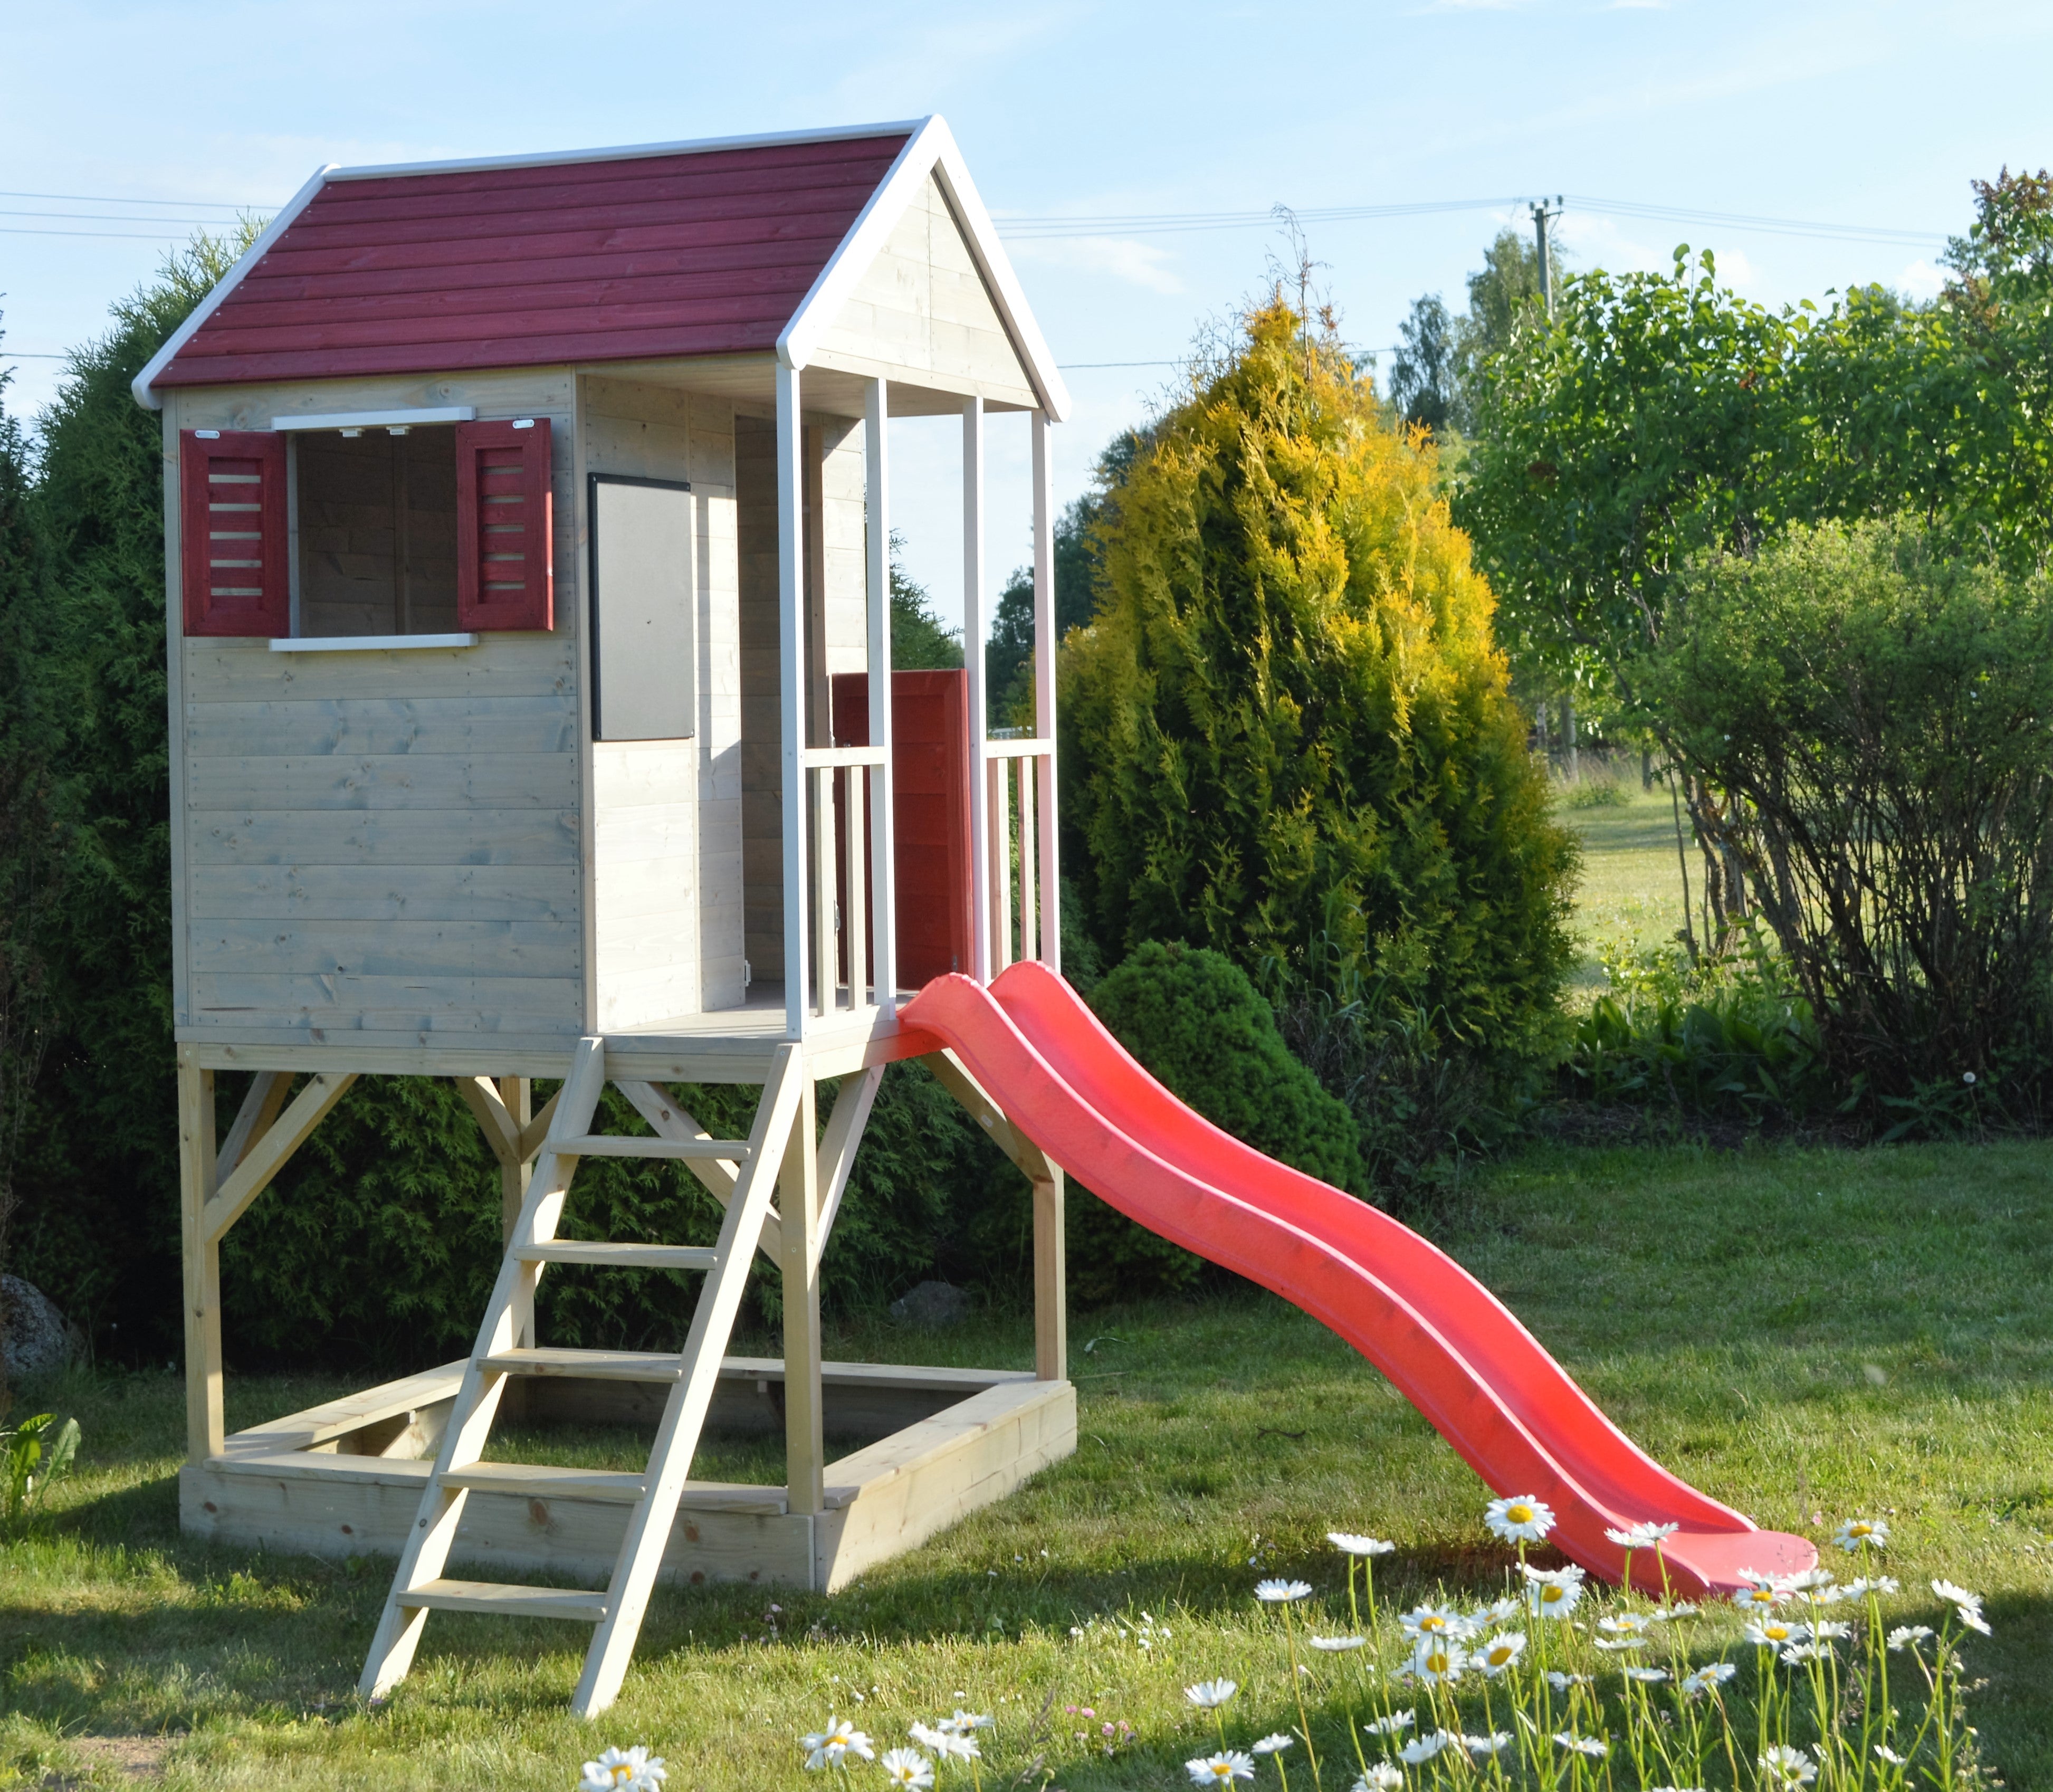 M7R-G Summer Adventure House with Platform and Slide + Gym Attachment